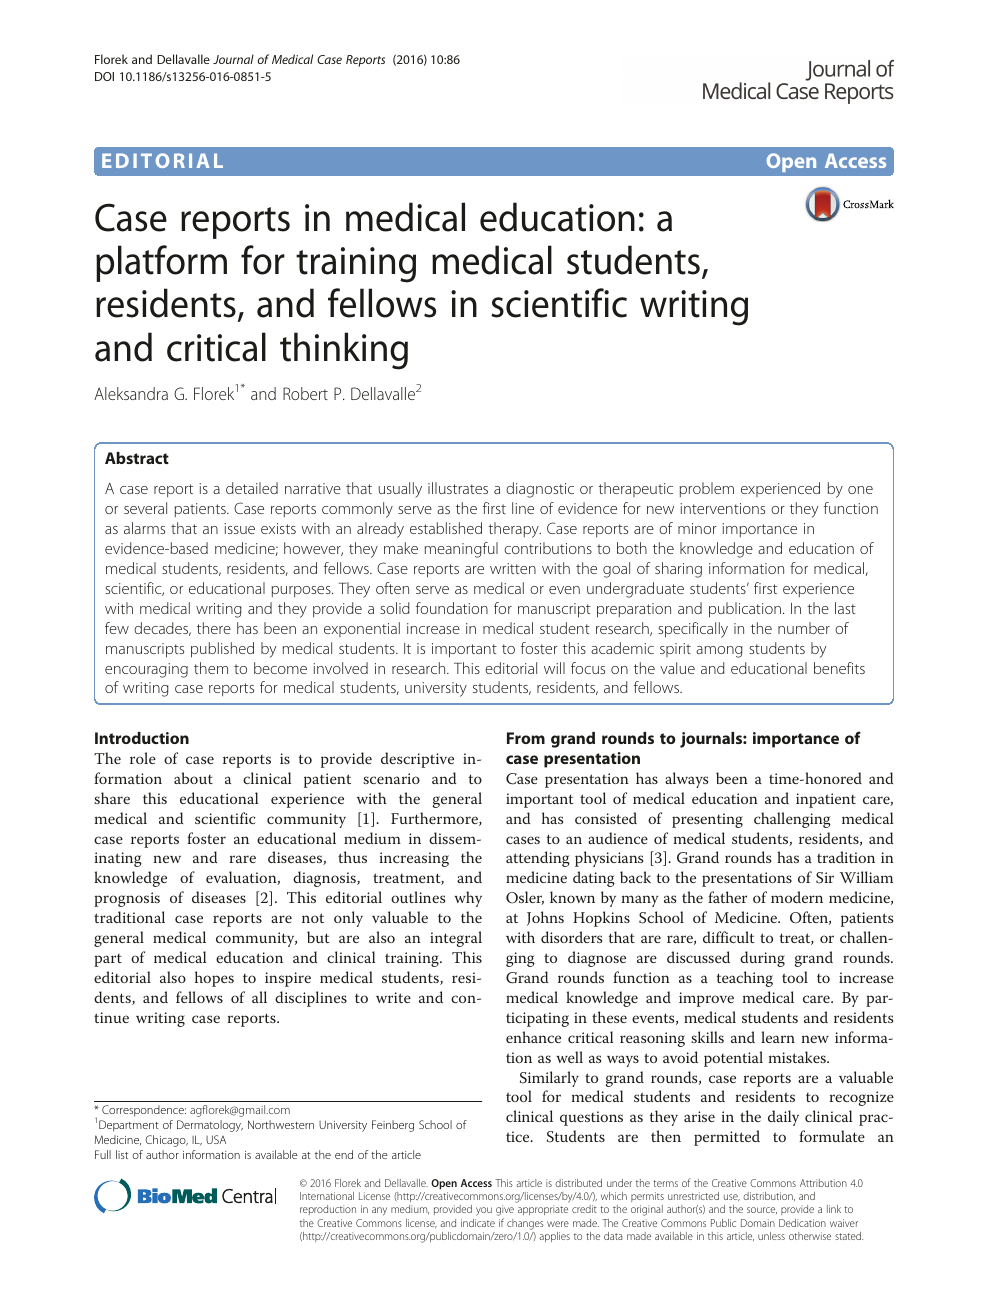 Case reports in medical education: a platform for training medical